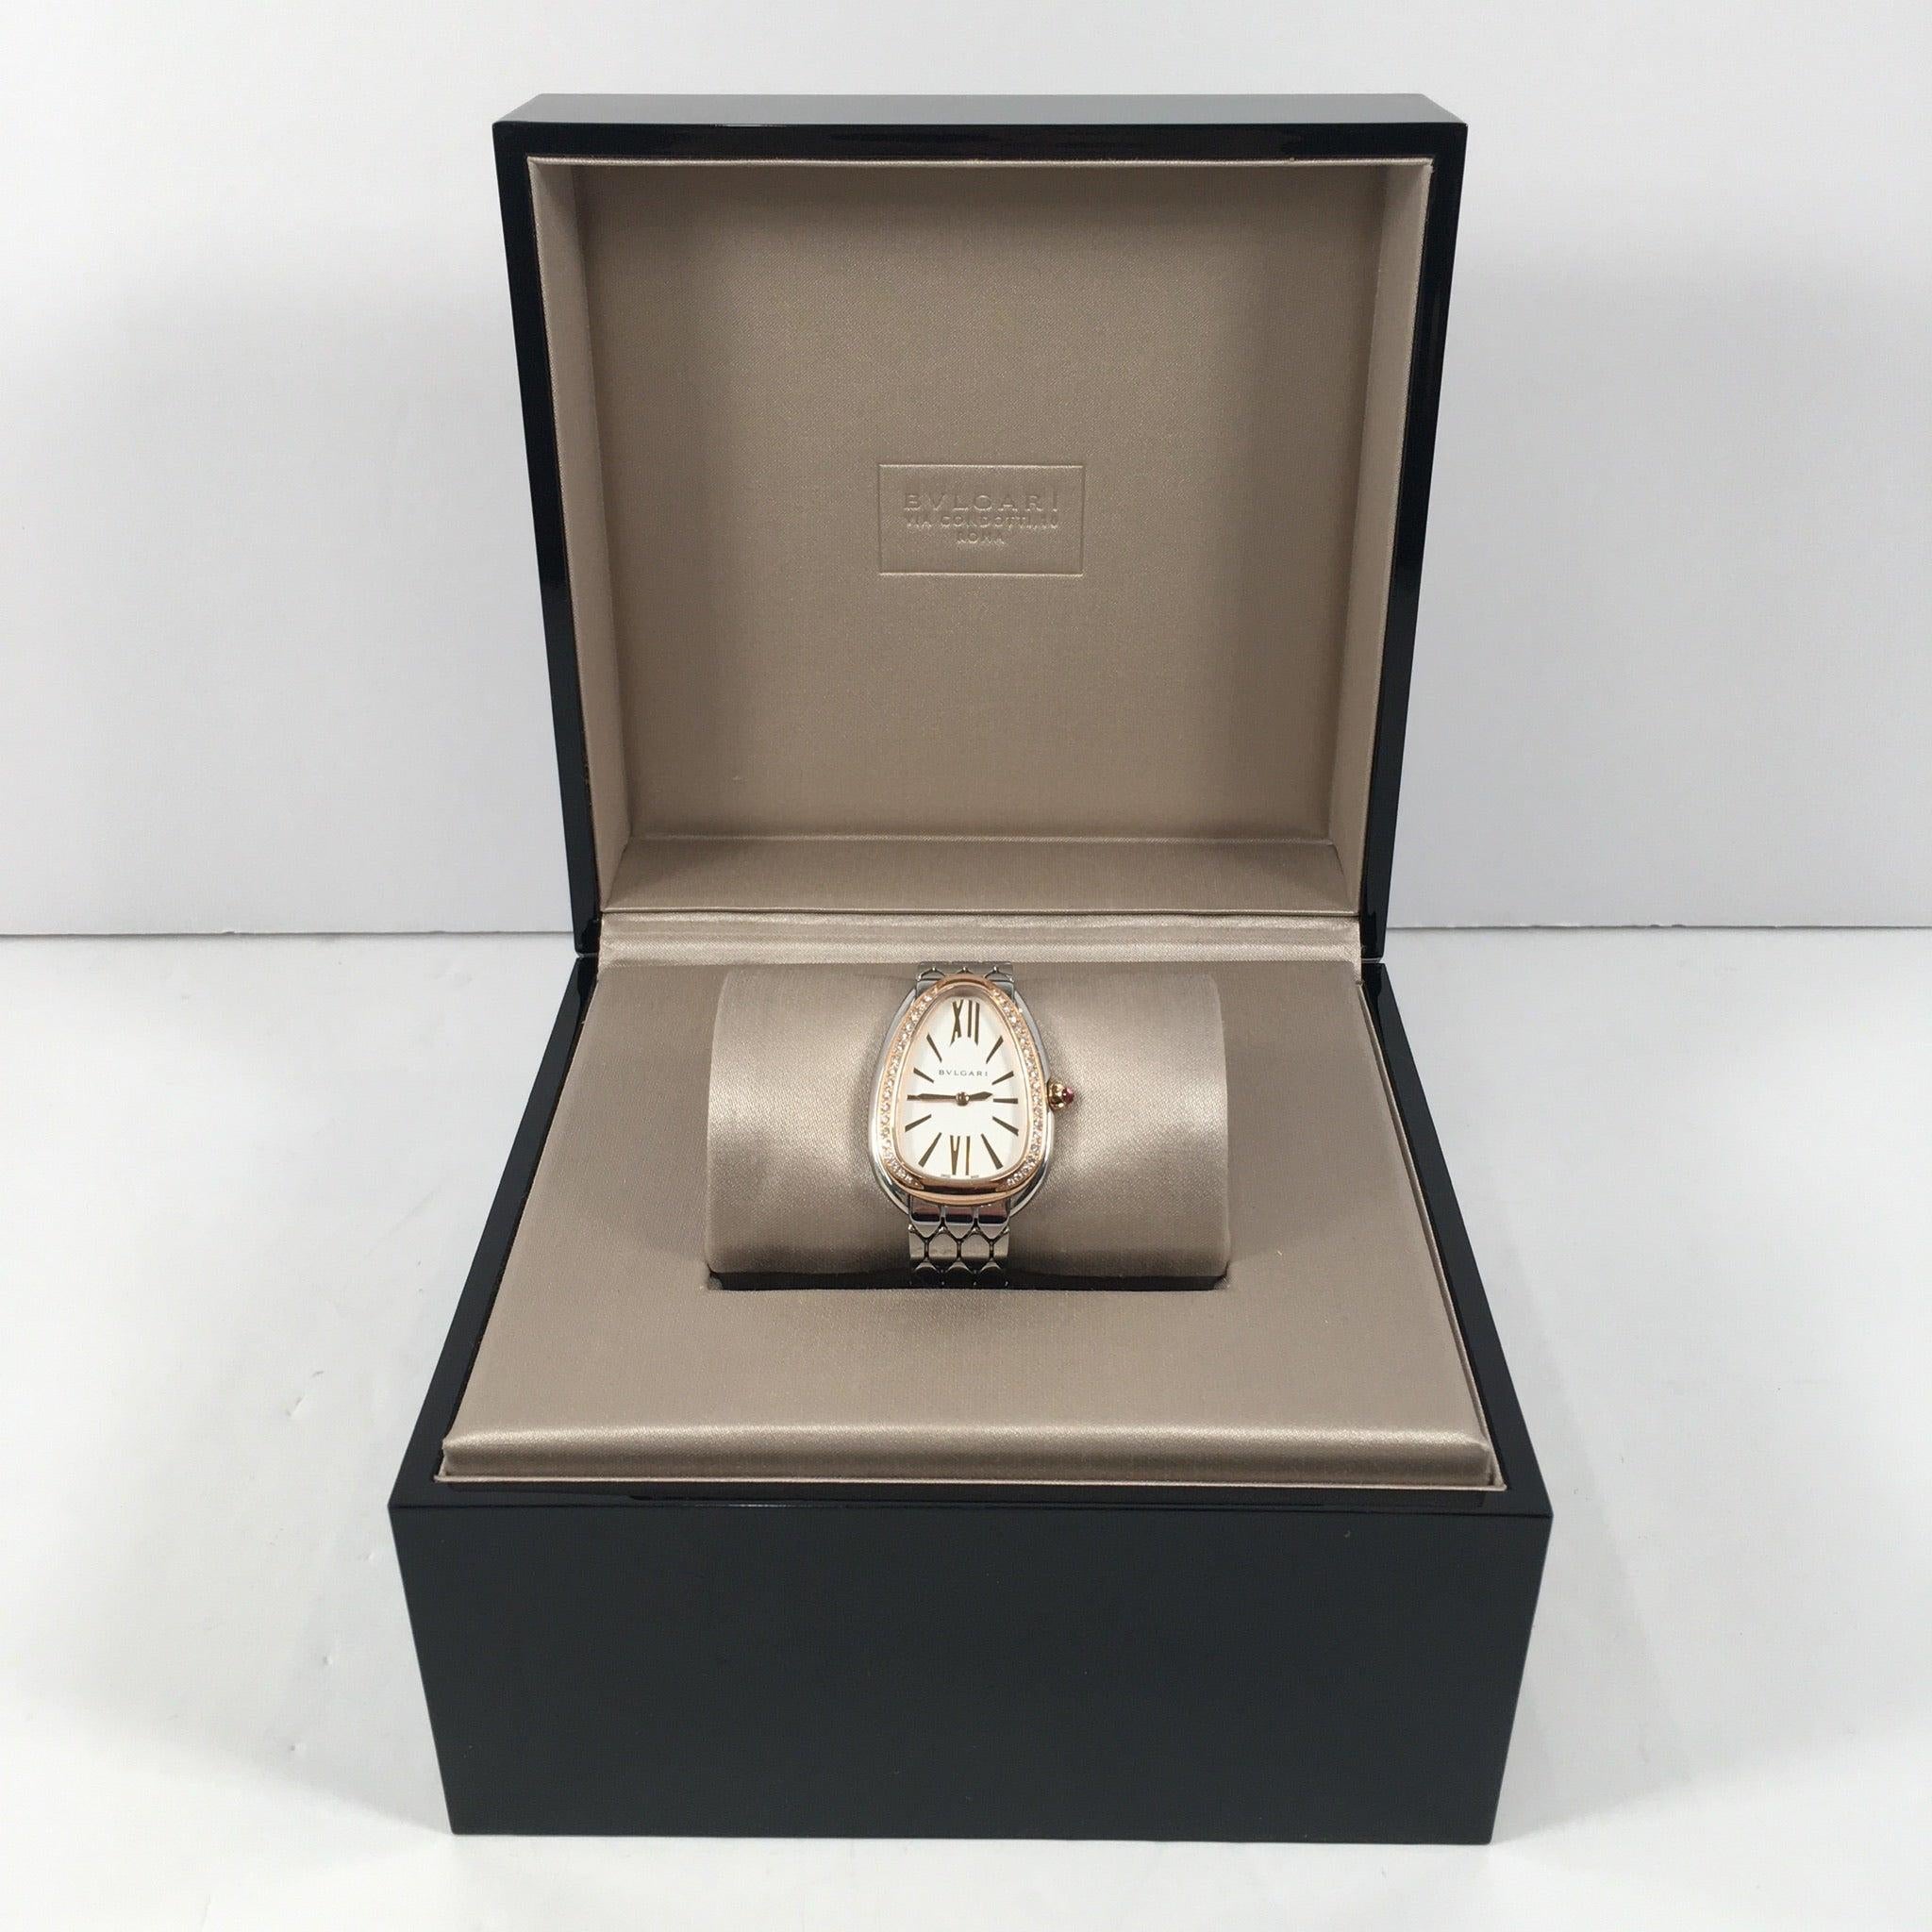 Bulgari Serpent Seduttori Diamond Watch

This is an authentic Bulgari Serpent Seduttori watch. This watch features a stainless steel case, stainless steel bracelet, 18 kt rose gold bezel set with diamonds and a white silver opaline dial. The case is